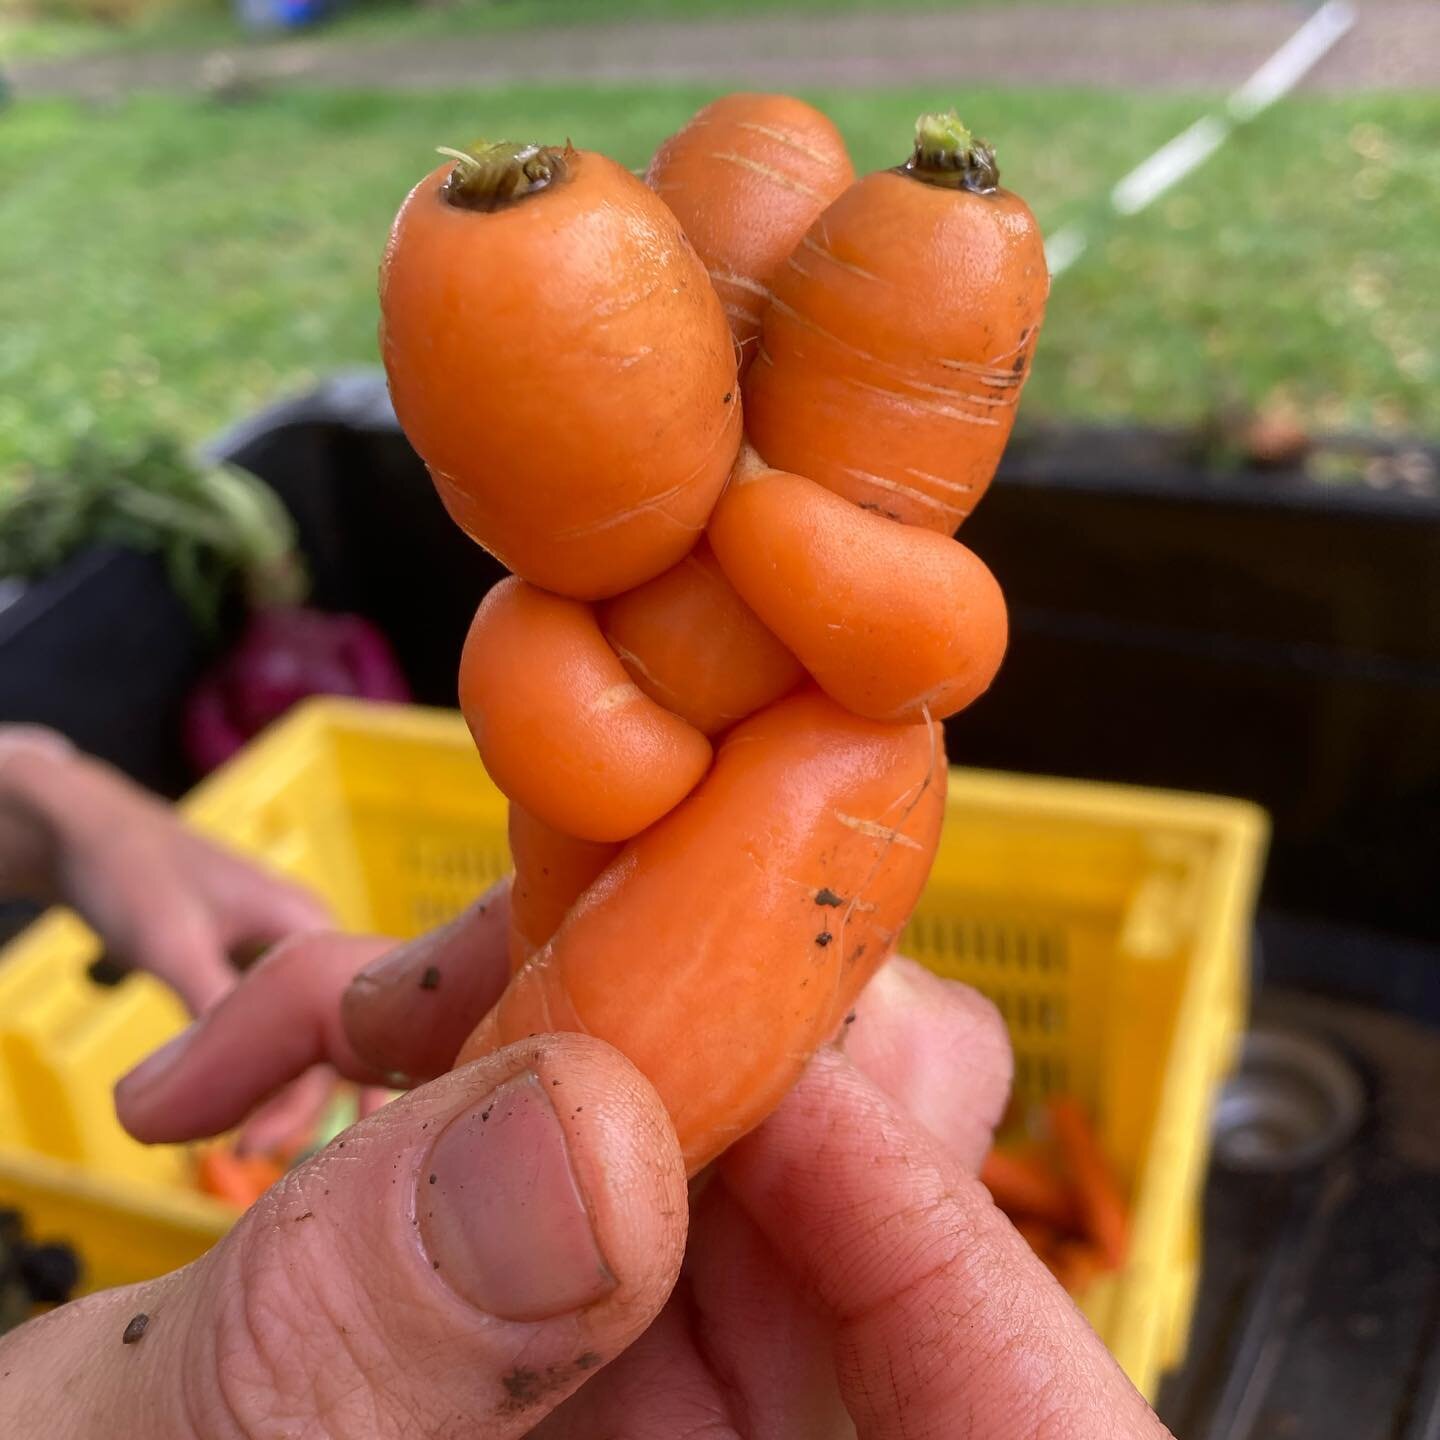 There&rsquo;s some rumbling of thunder scaring the carrots now, so make sure you stop by the @cazenoviafarmersmarket later to take them home and keep them safe in your fridge and stovetops!